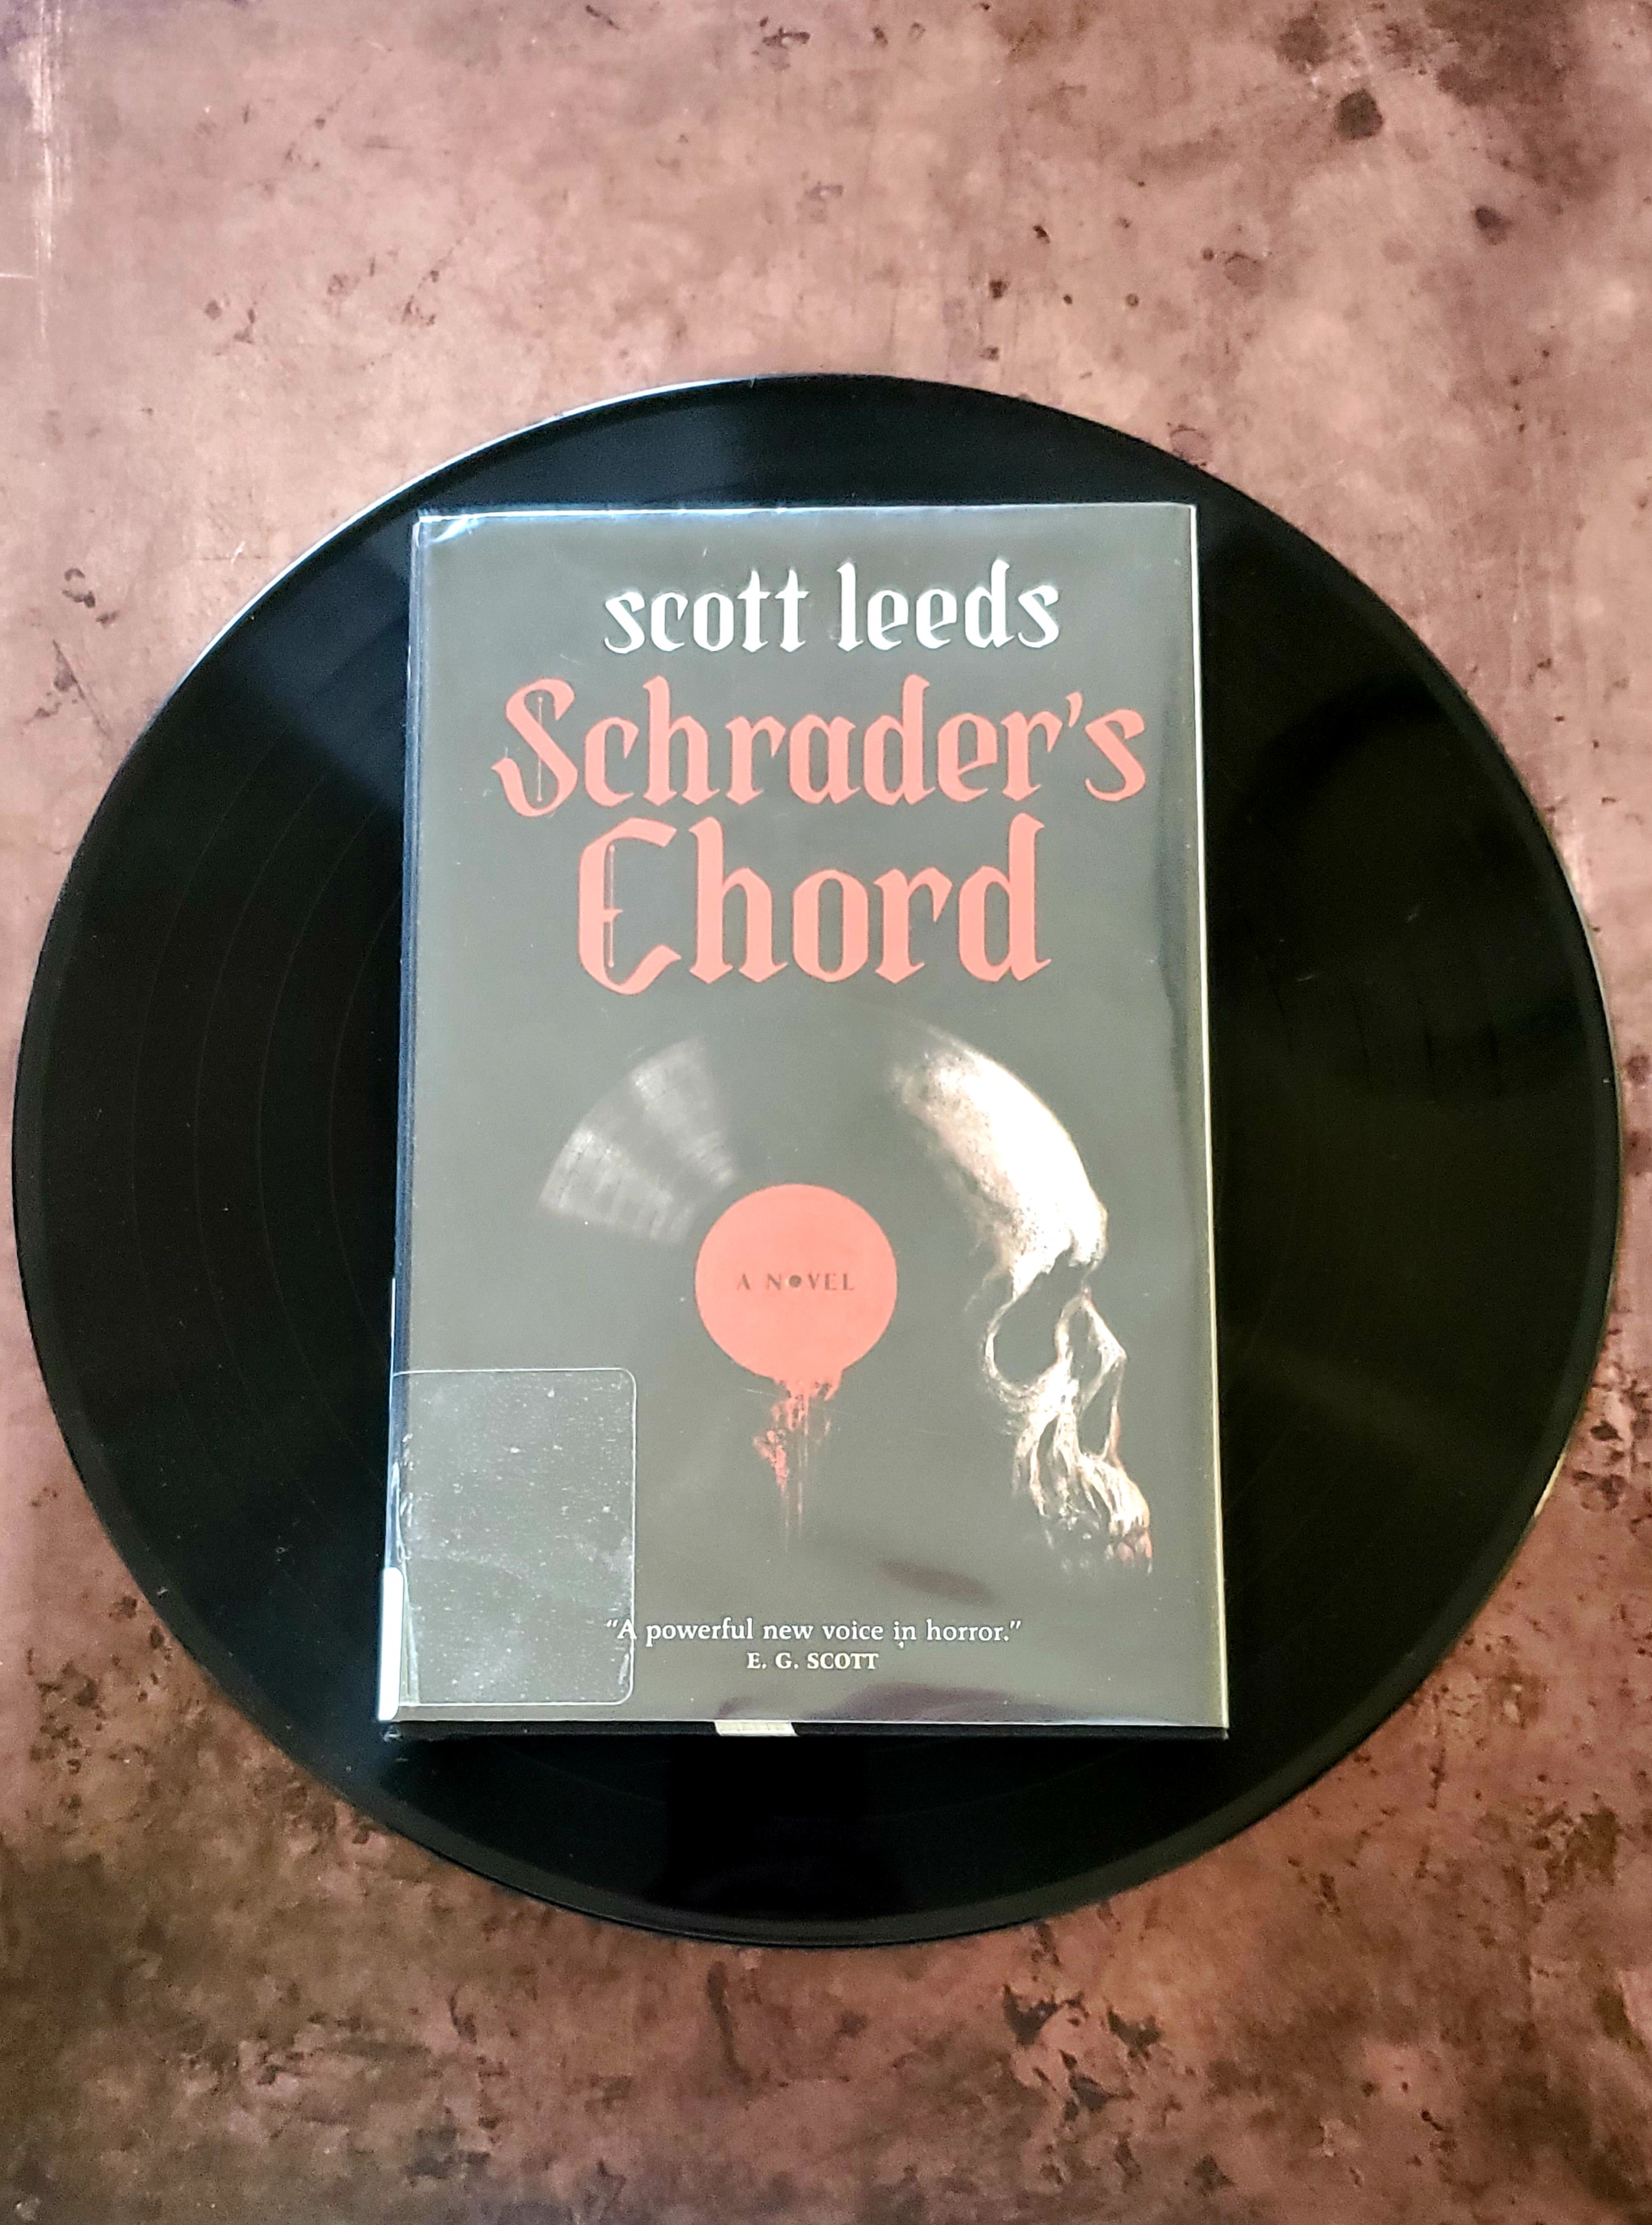 Book cover of Schrader's Chord by Scott Leeds, resting on a music vinyl record